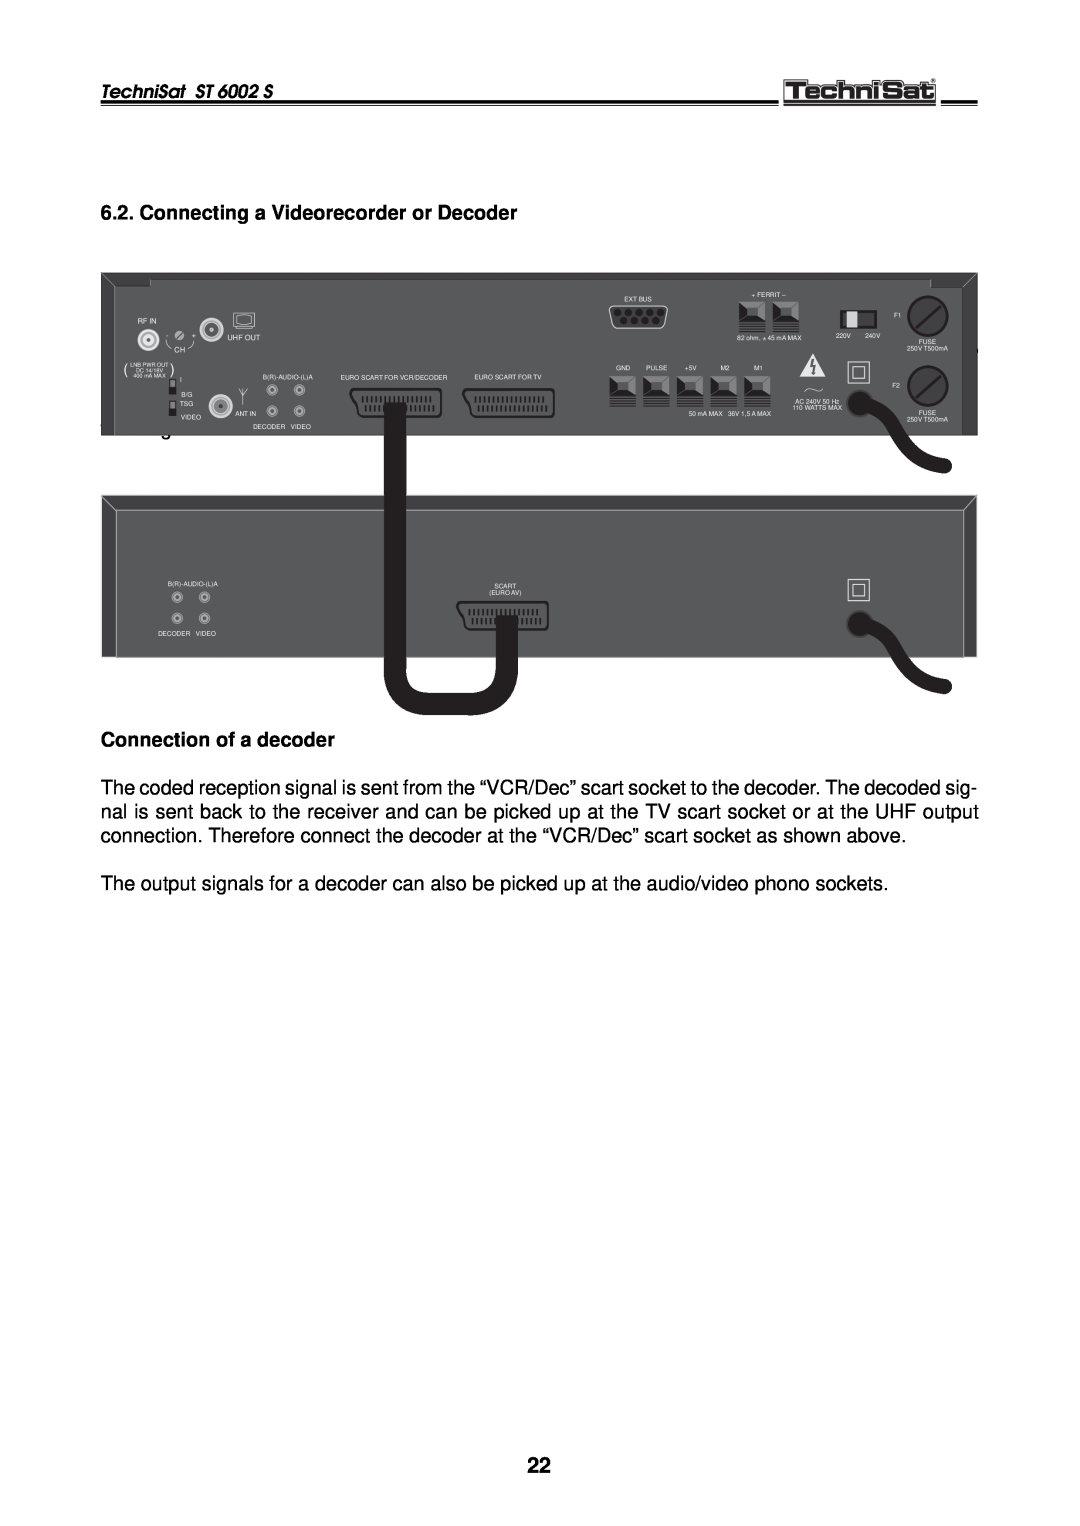 TechniSat ST 6002 S manual Connecting a Videorecorder or Decoder, Connection of a Videorecorder, diagrams below 